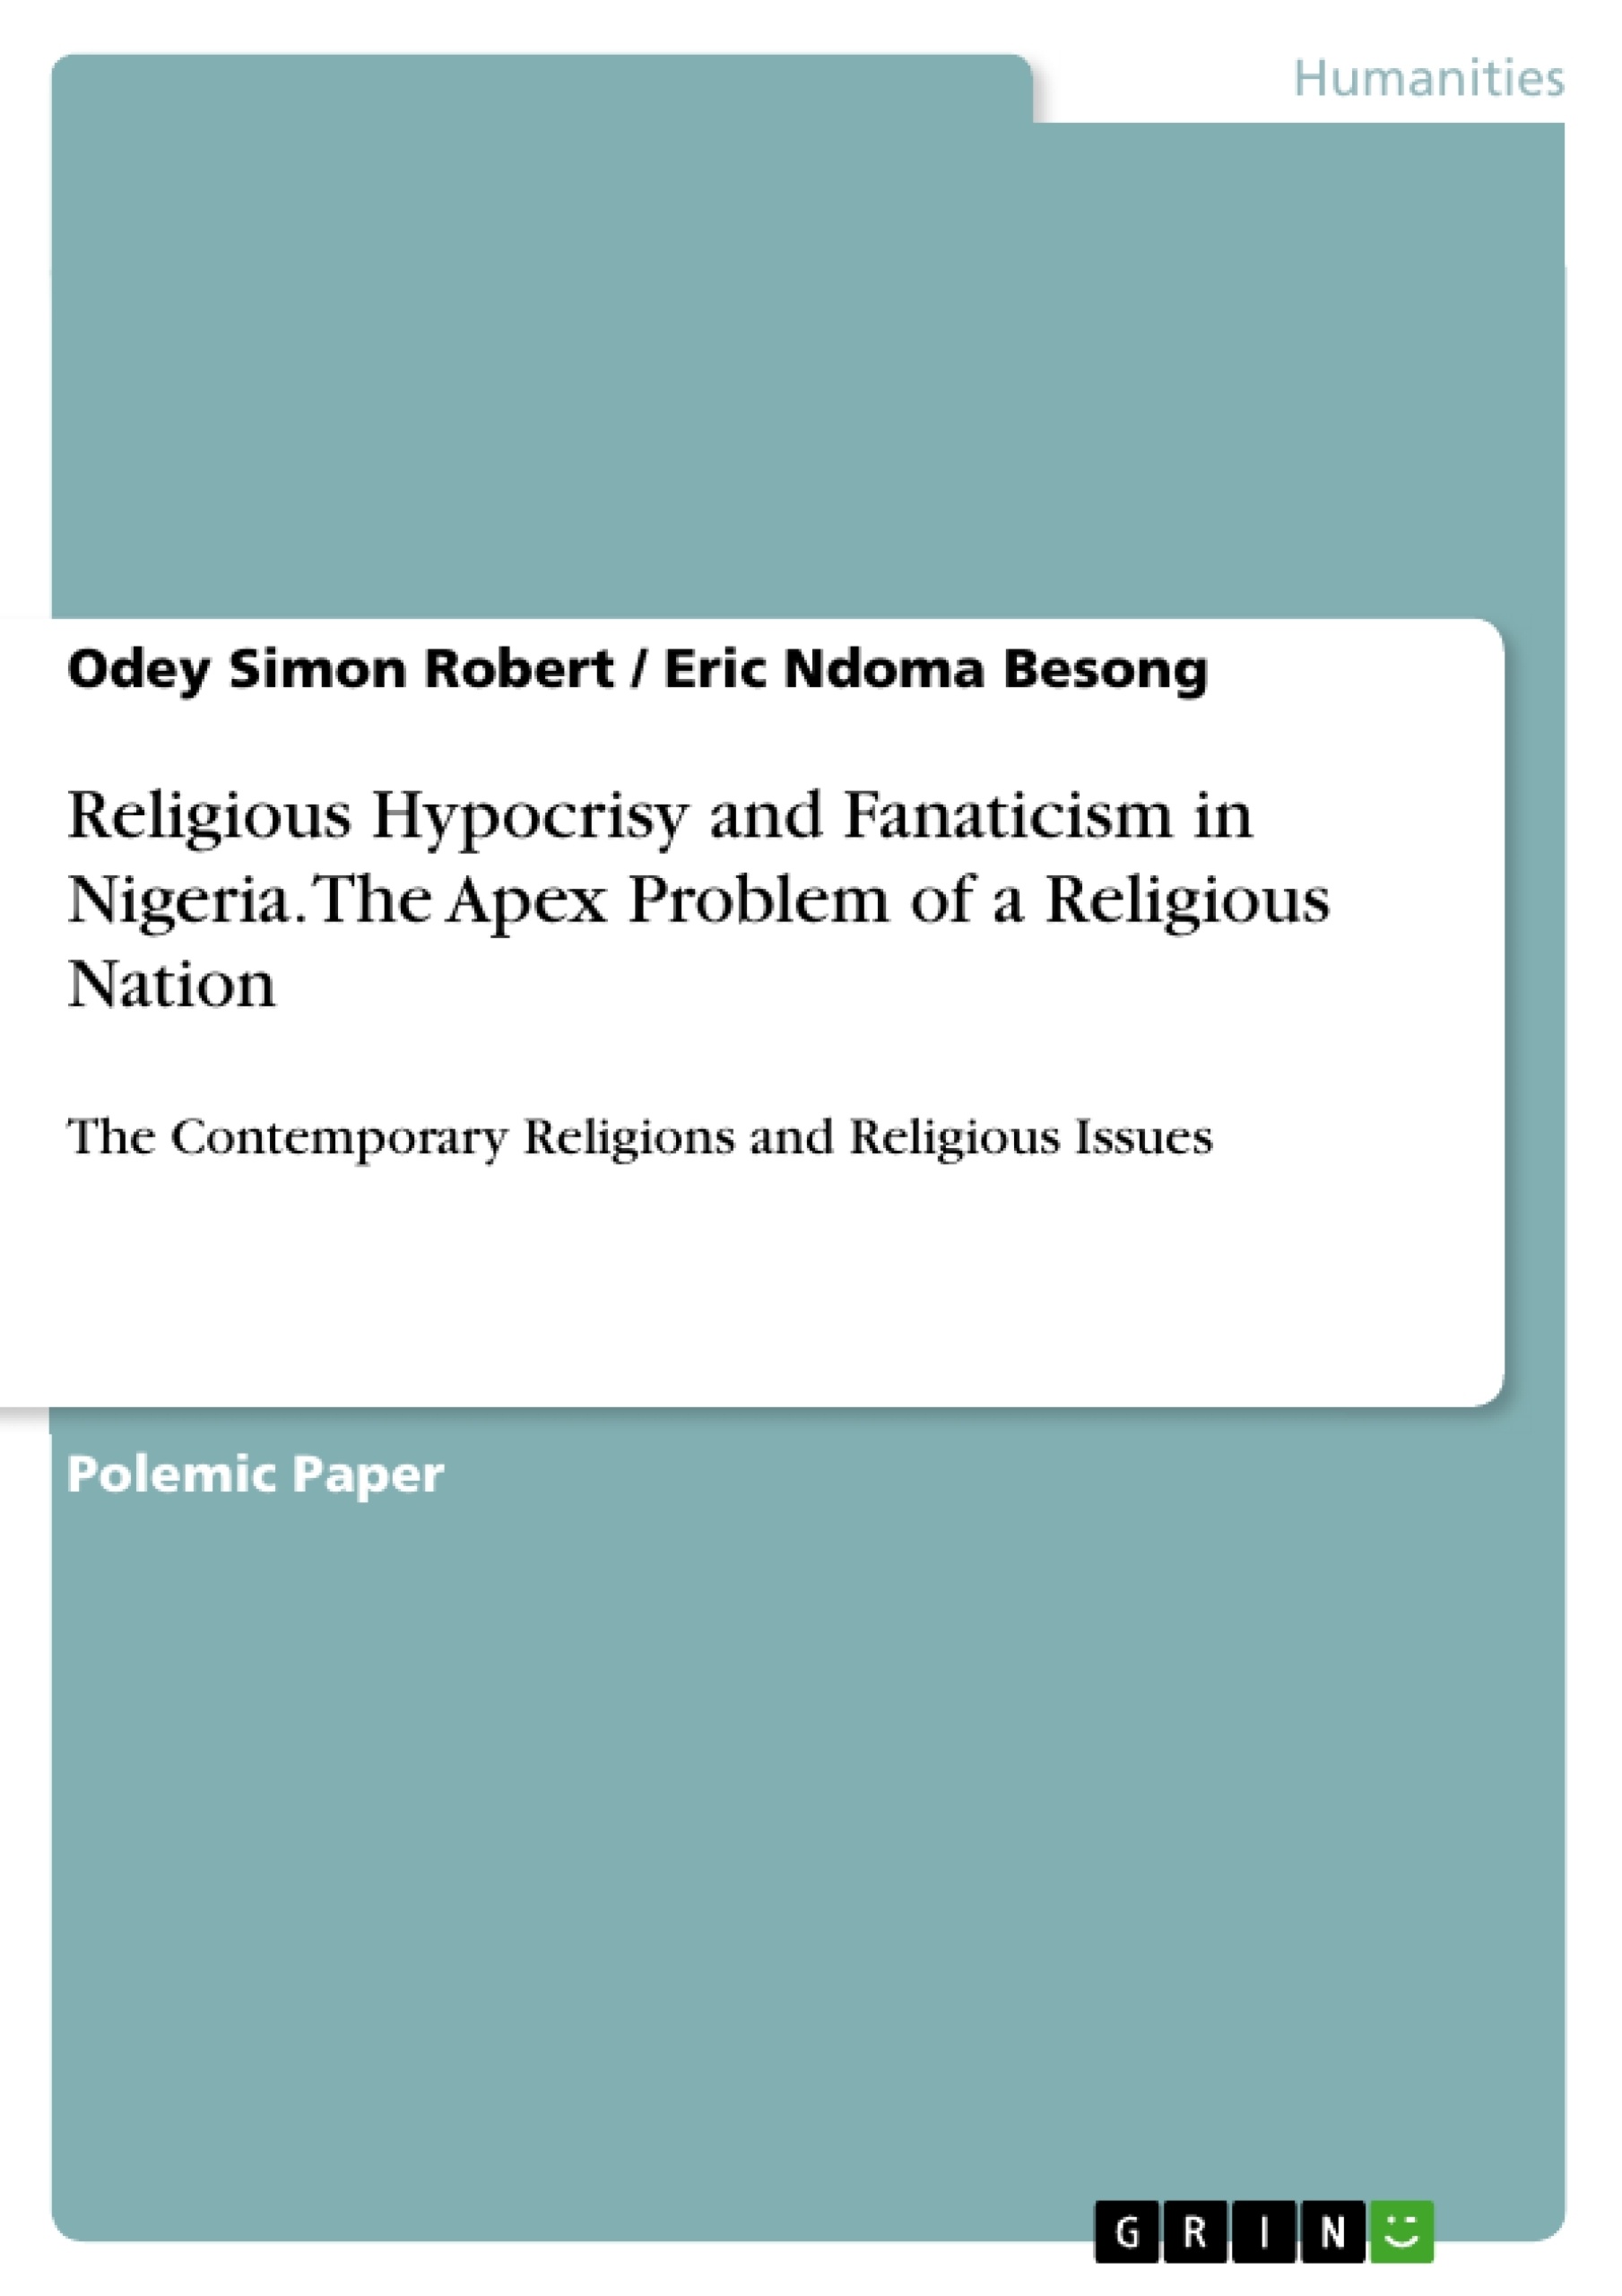 Title: Religious Hypocrisy and Fanaticism in Nigeria. The Apex Problem of a Religious Nation